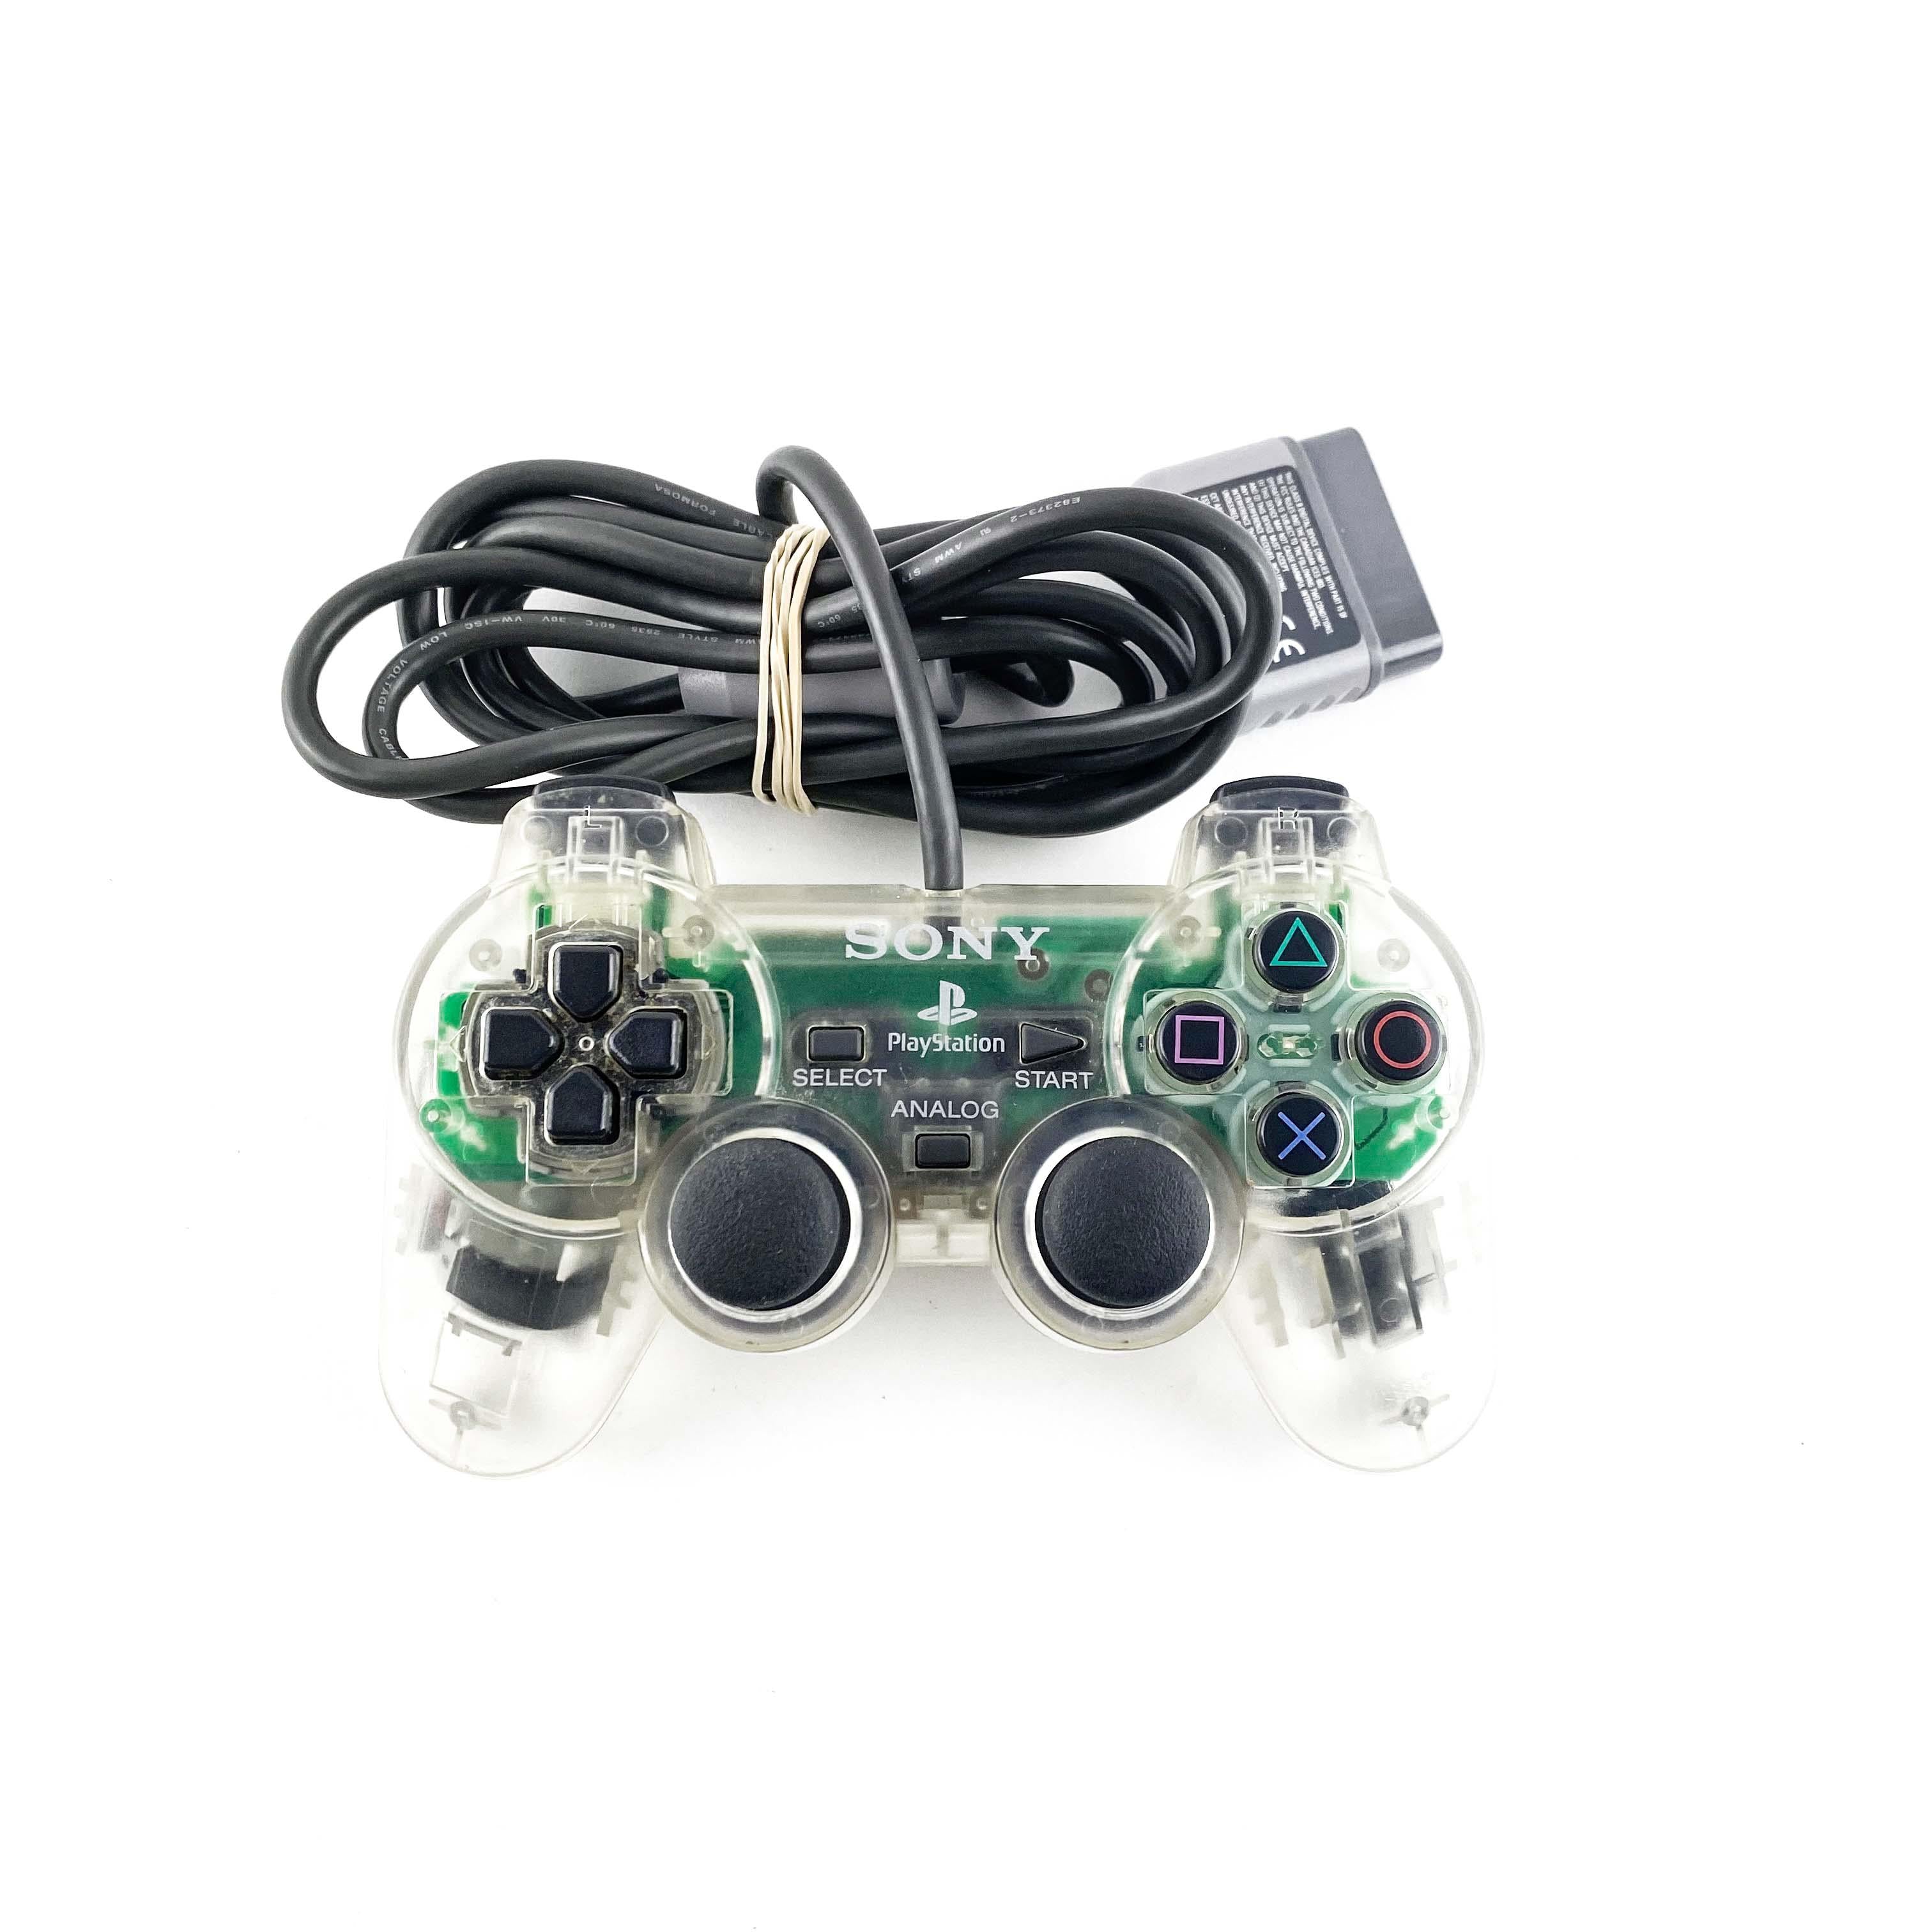 Sony PlayStation 1 PS1 Transparent Clear Controller (SCPH-1200)